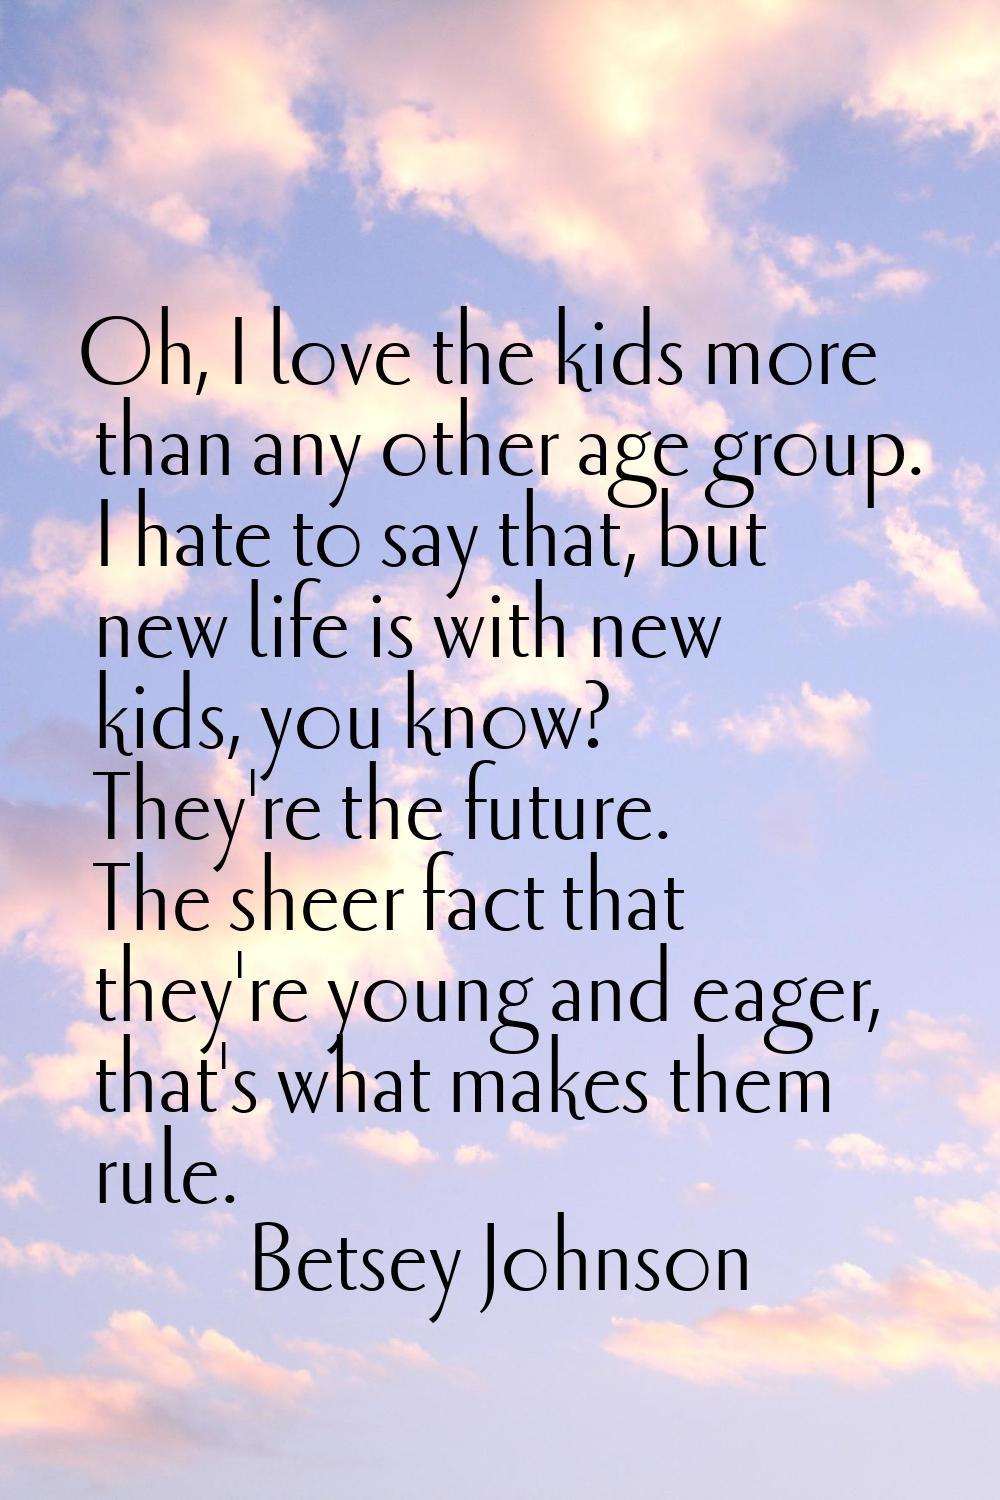 Oh, I love the kids more than any other age group. I hate to say that, but new life is with new kid